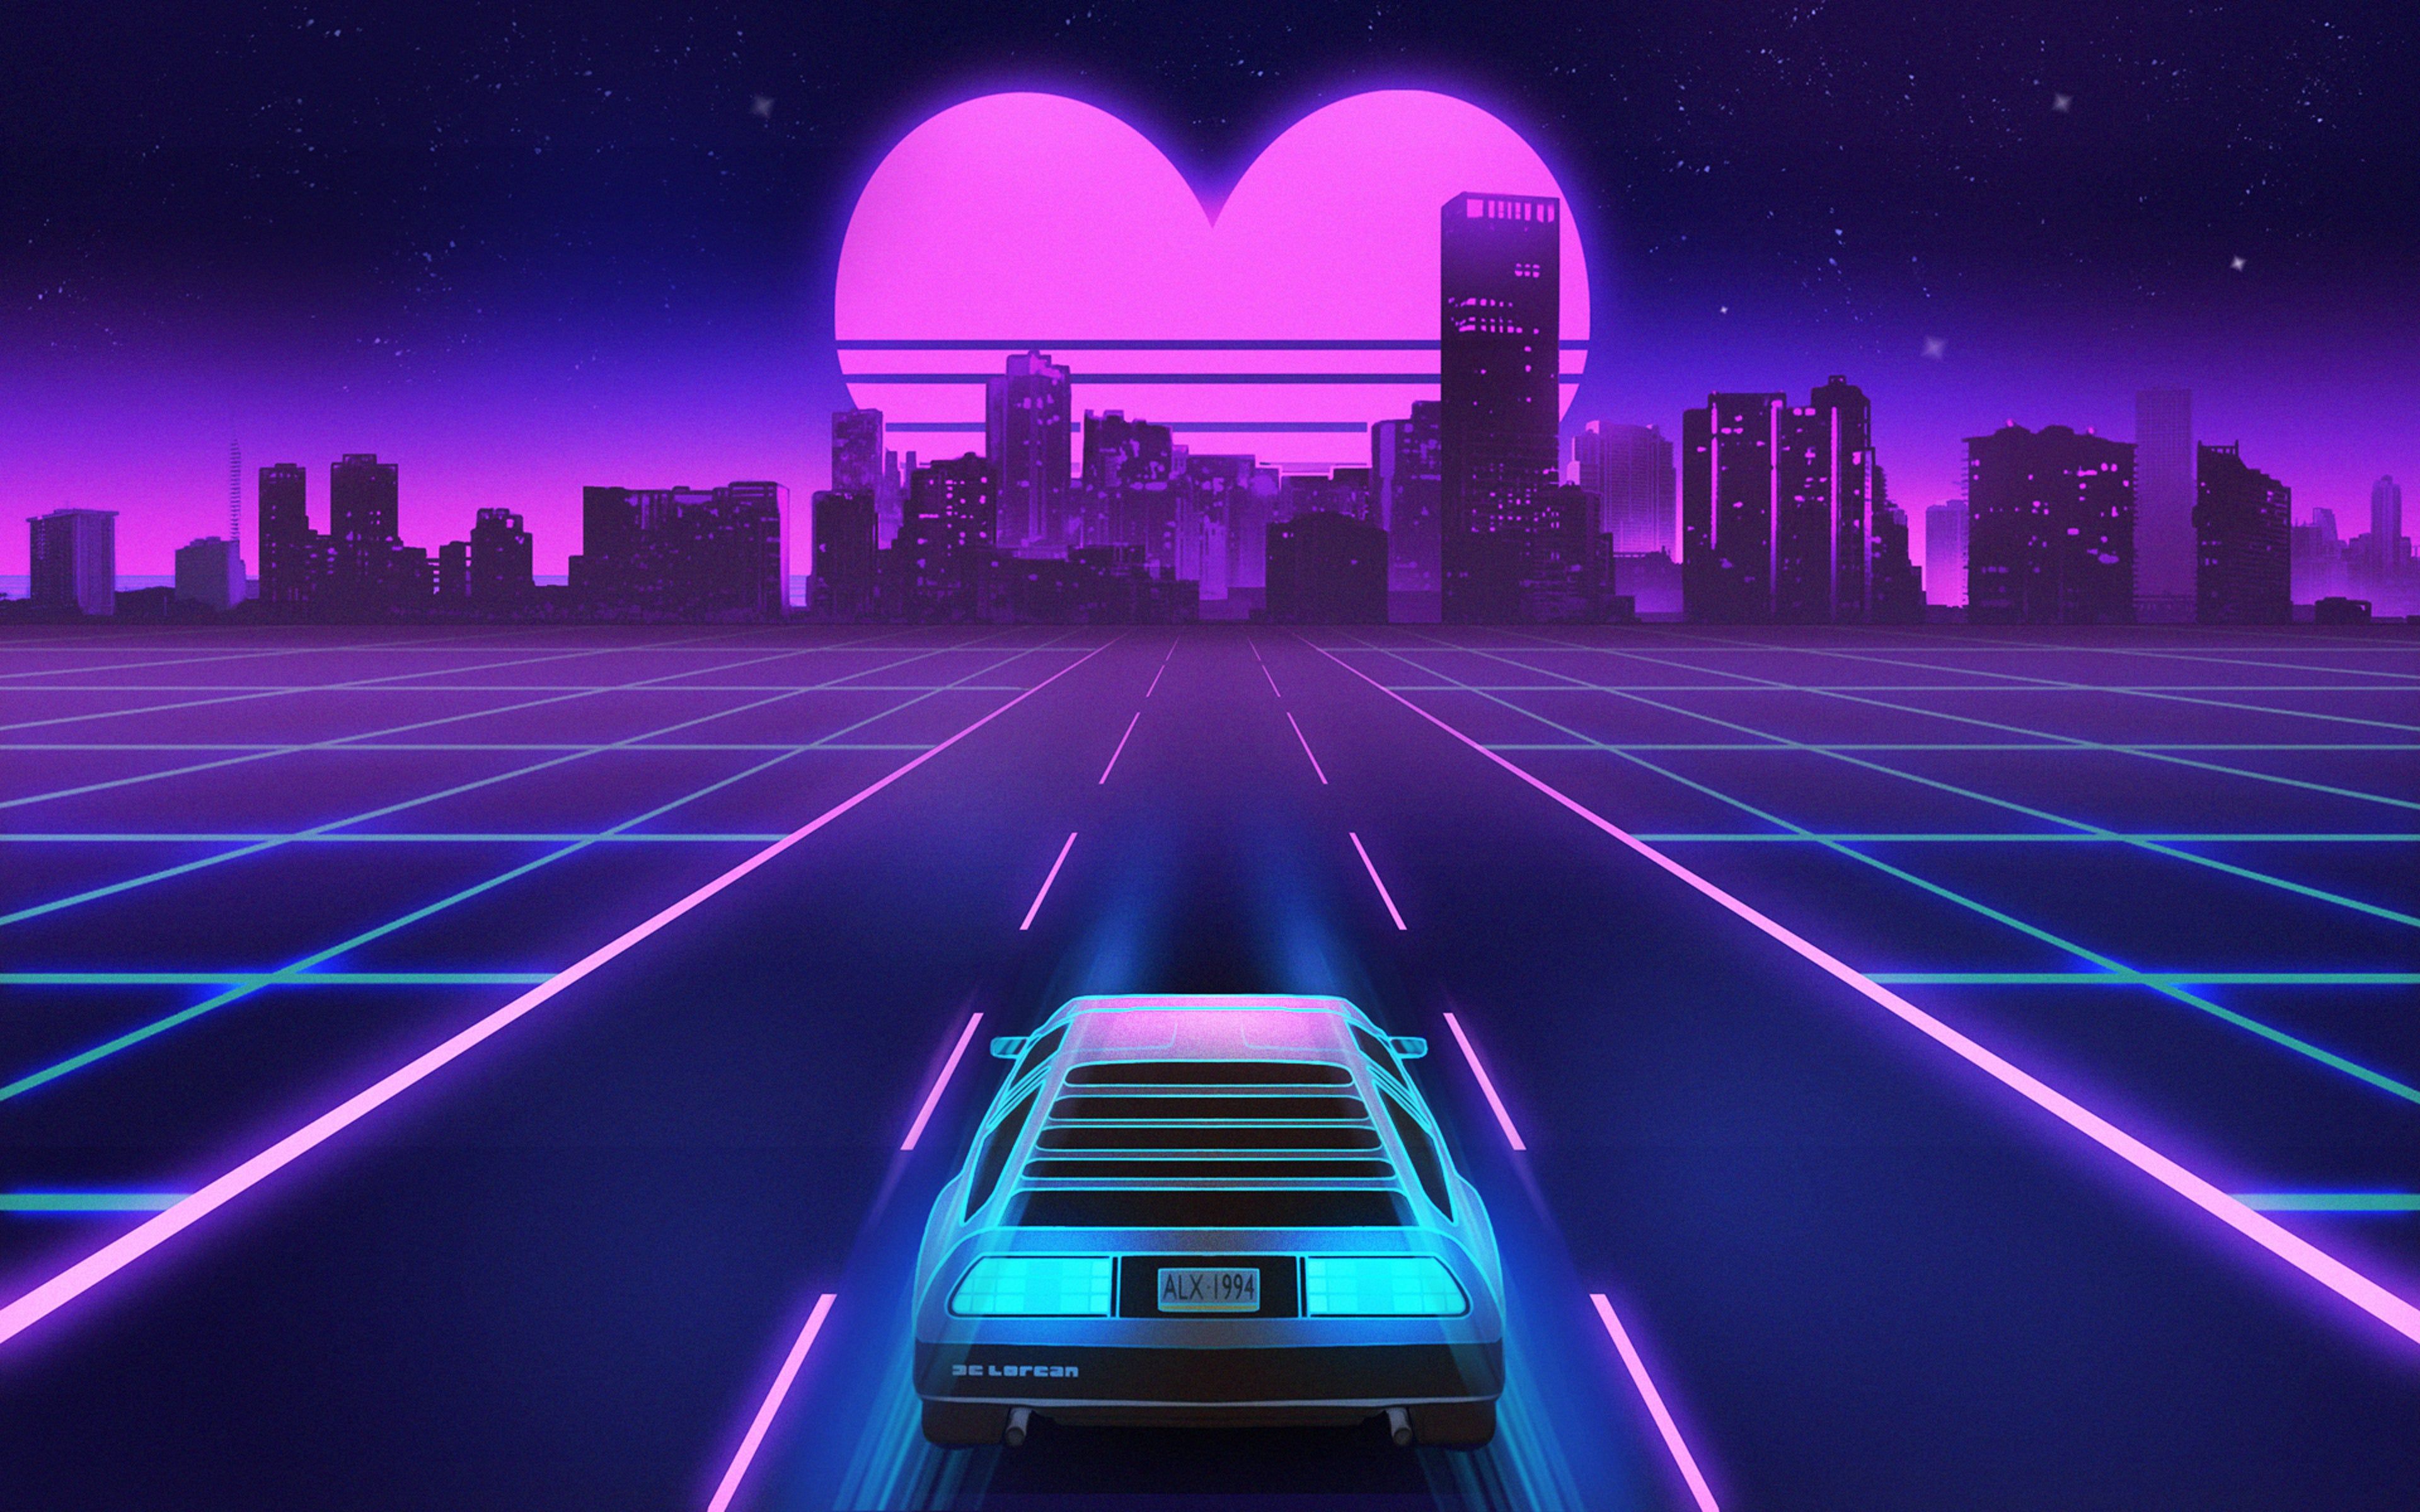 A car driving down the road in front of an animated city - Vaporwave